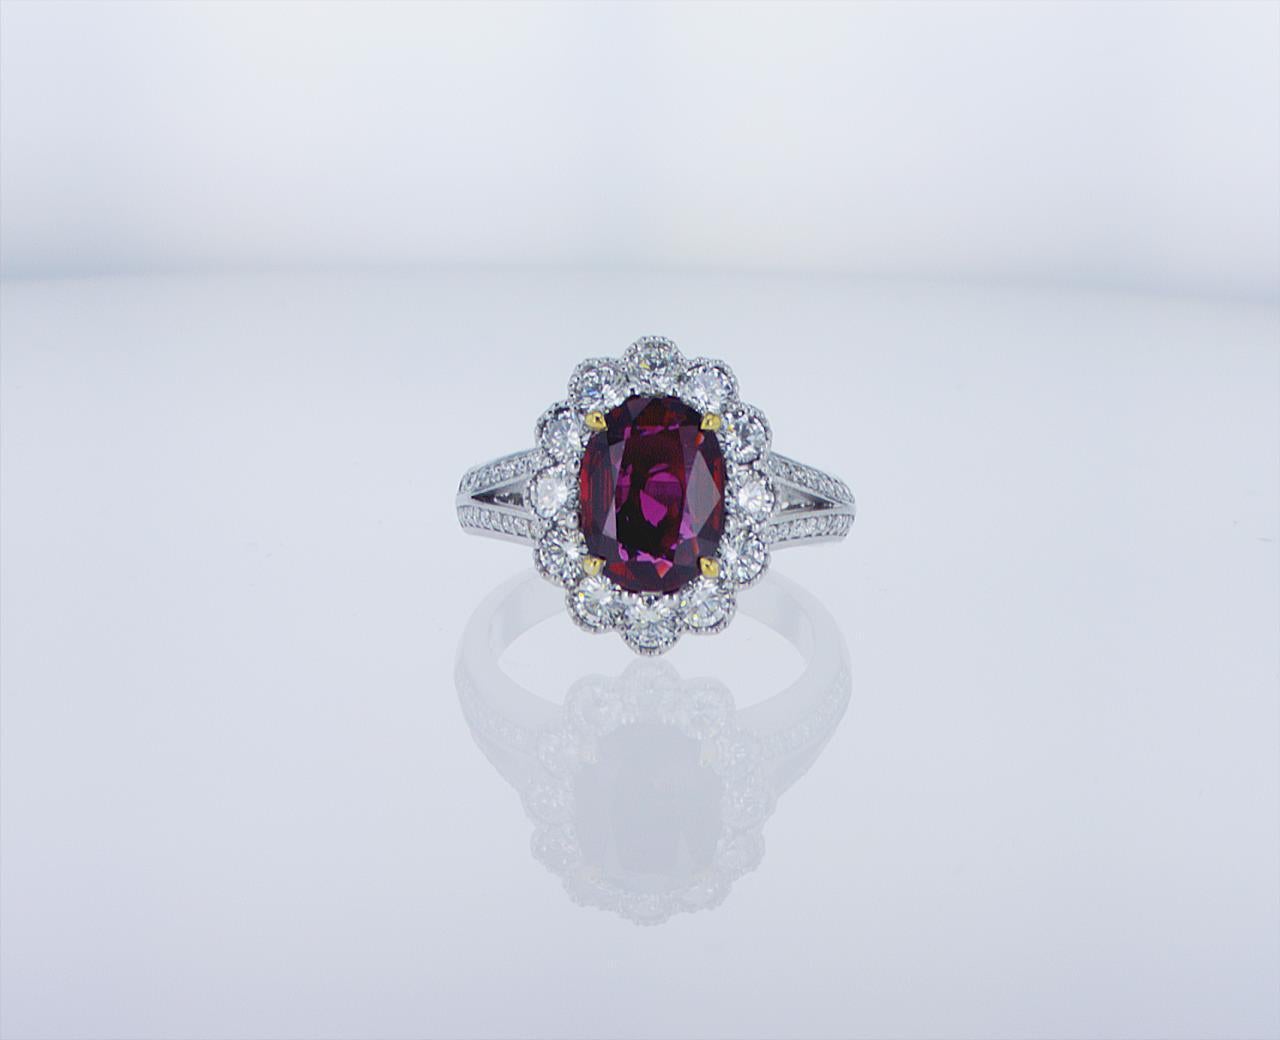 Oval Thai Ruby, 2.03 Carat. 1.08 Carats total weight of round brilliant diamonds G/H color, VS clarity. 18k White Gold with Palladium mounting, and 18k Yellow Gold center prongs.